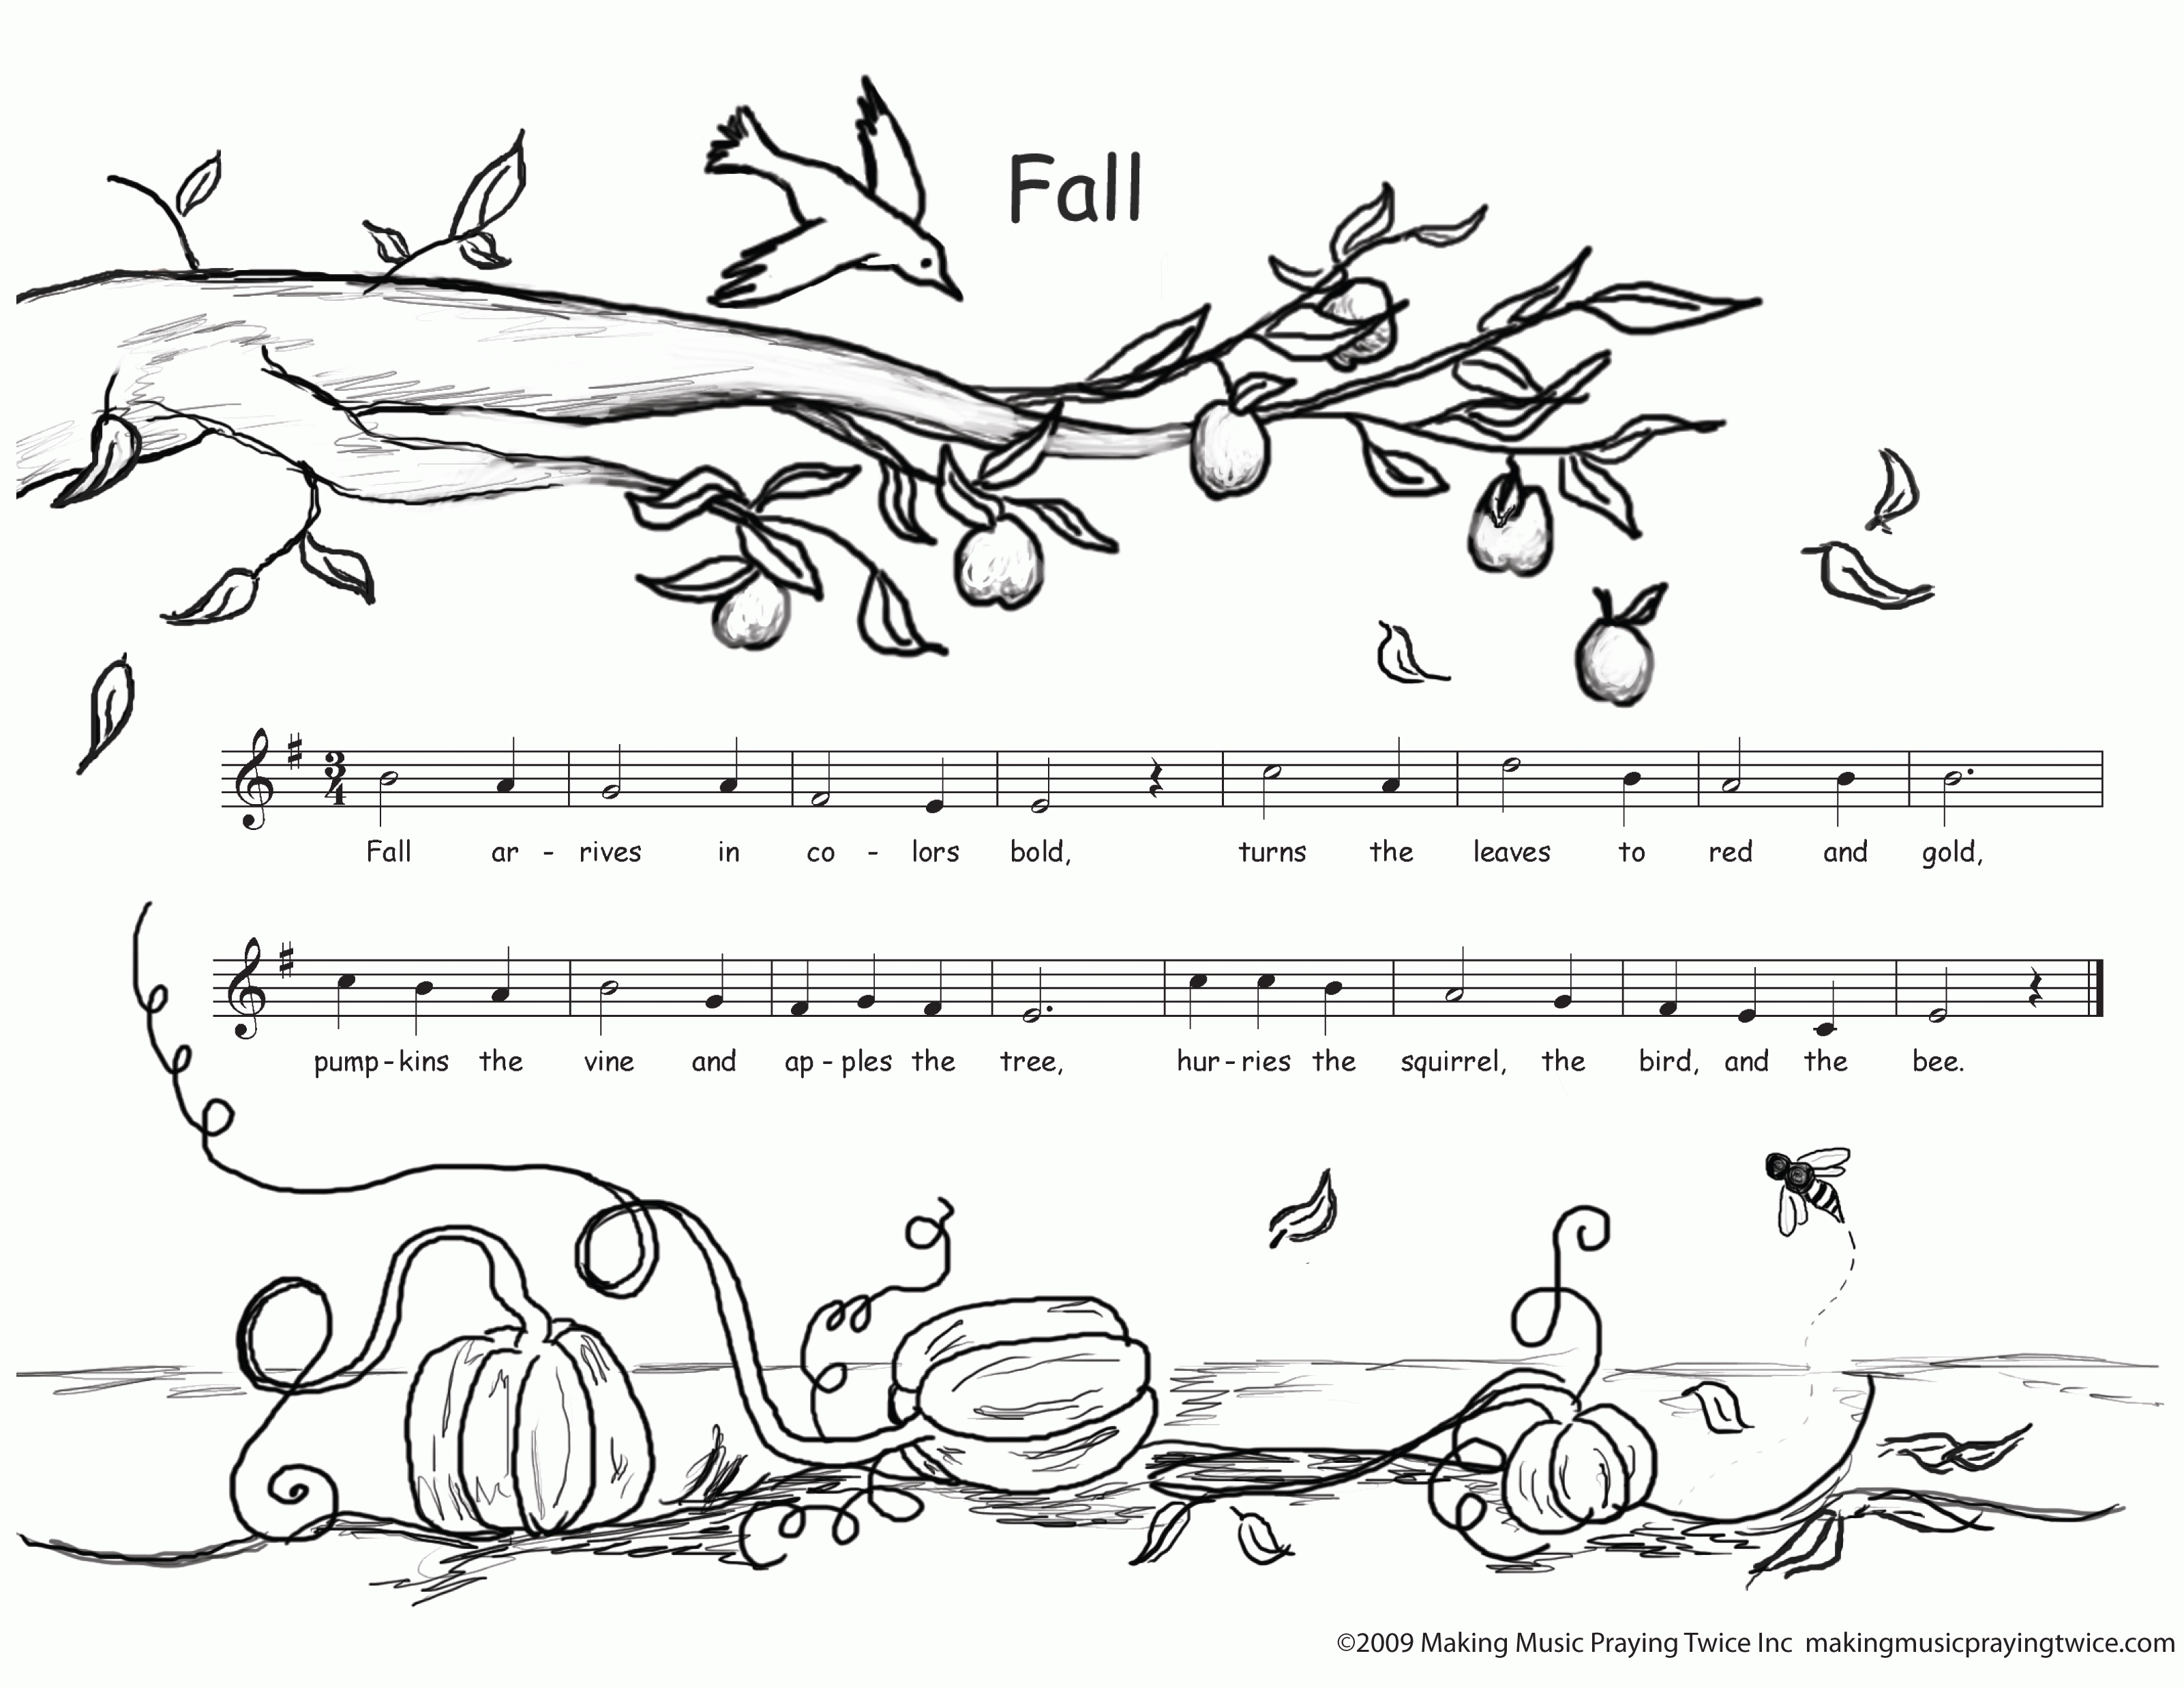 Free Downloadable Coloring Pages | Catholic Music for Kids